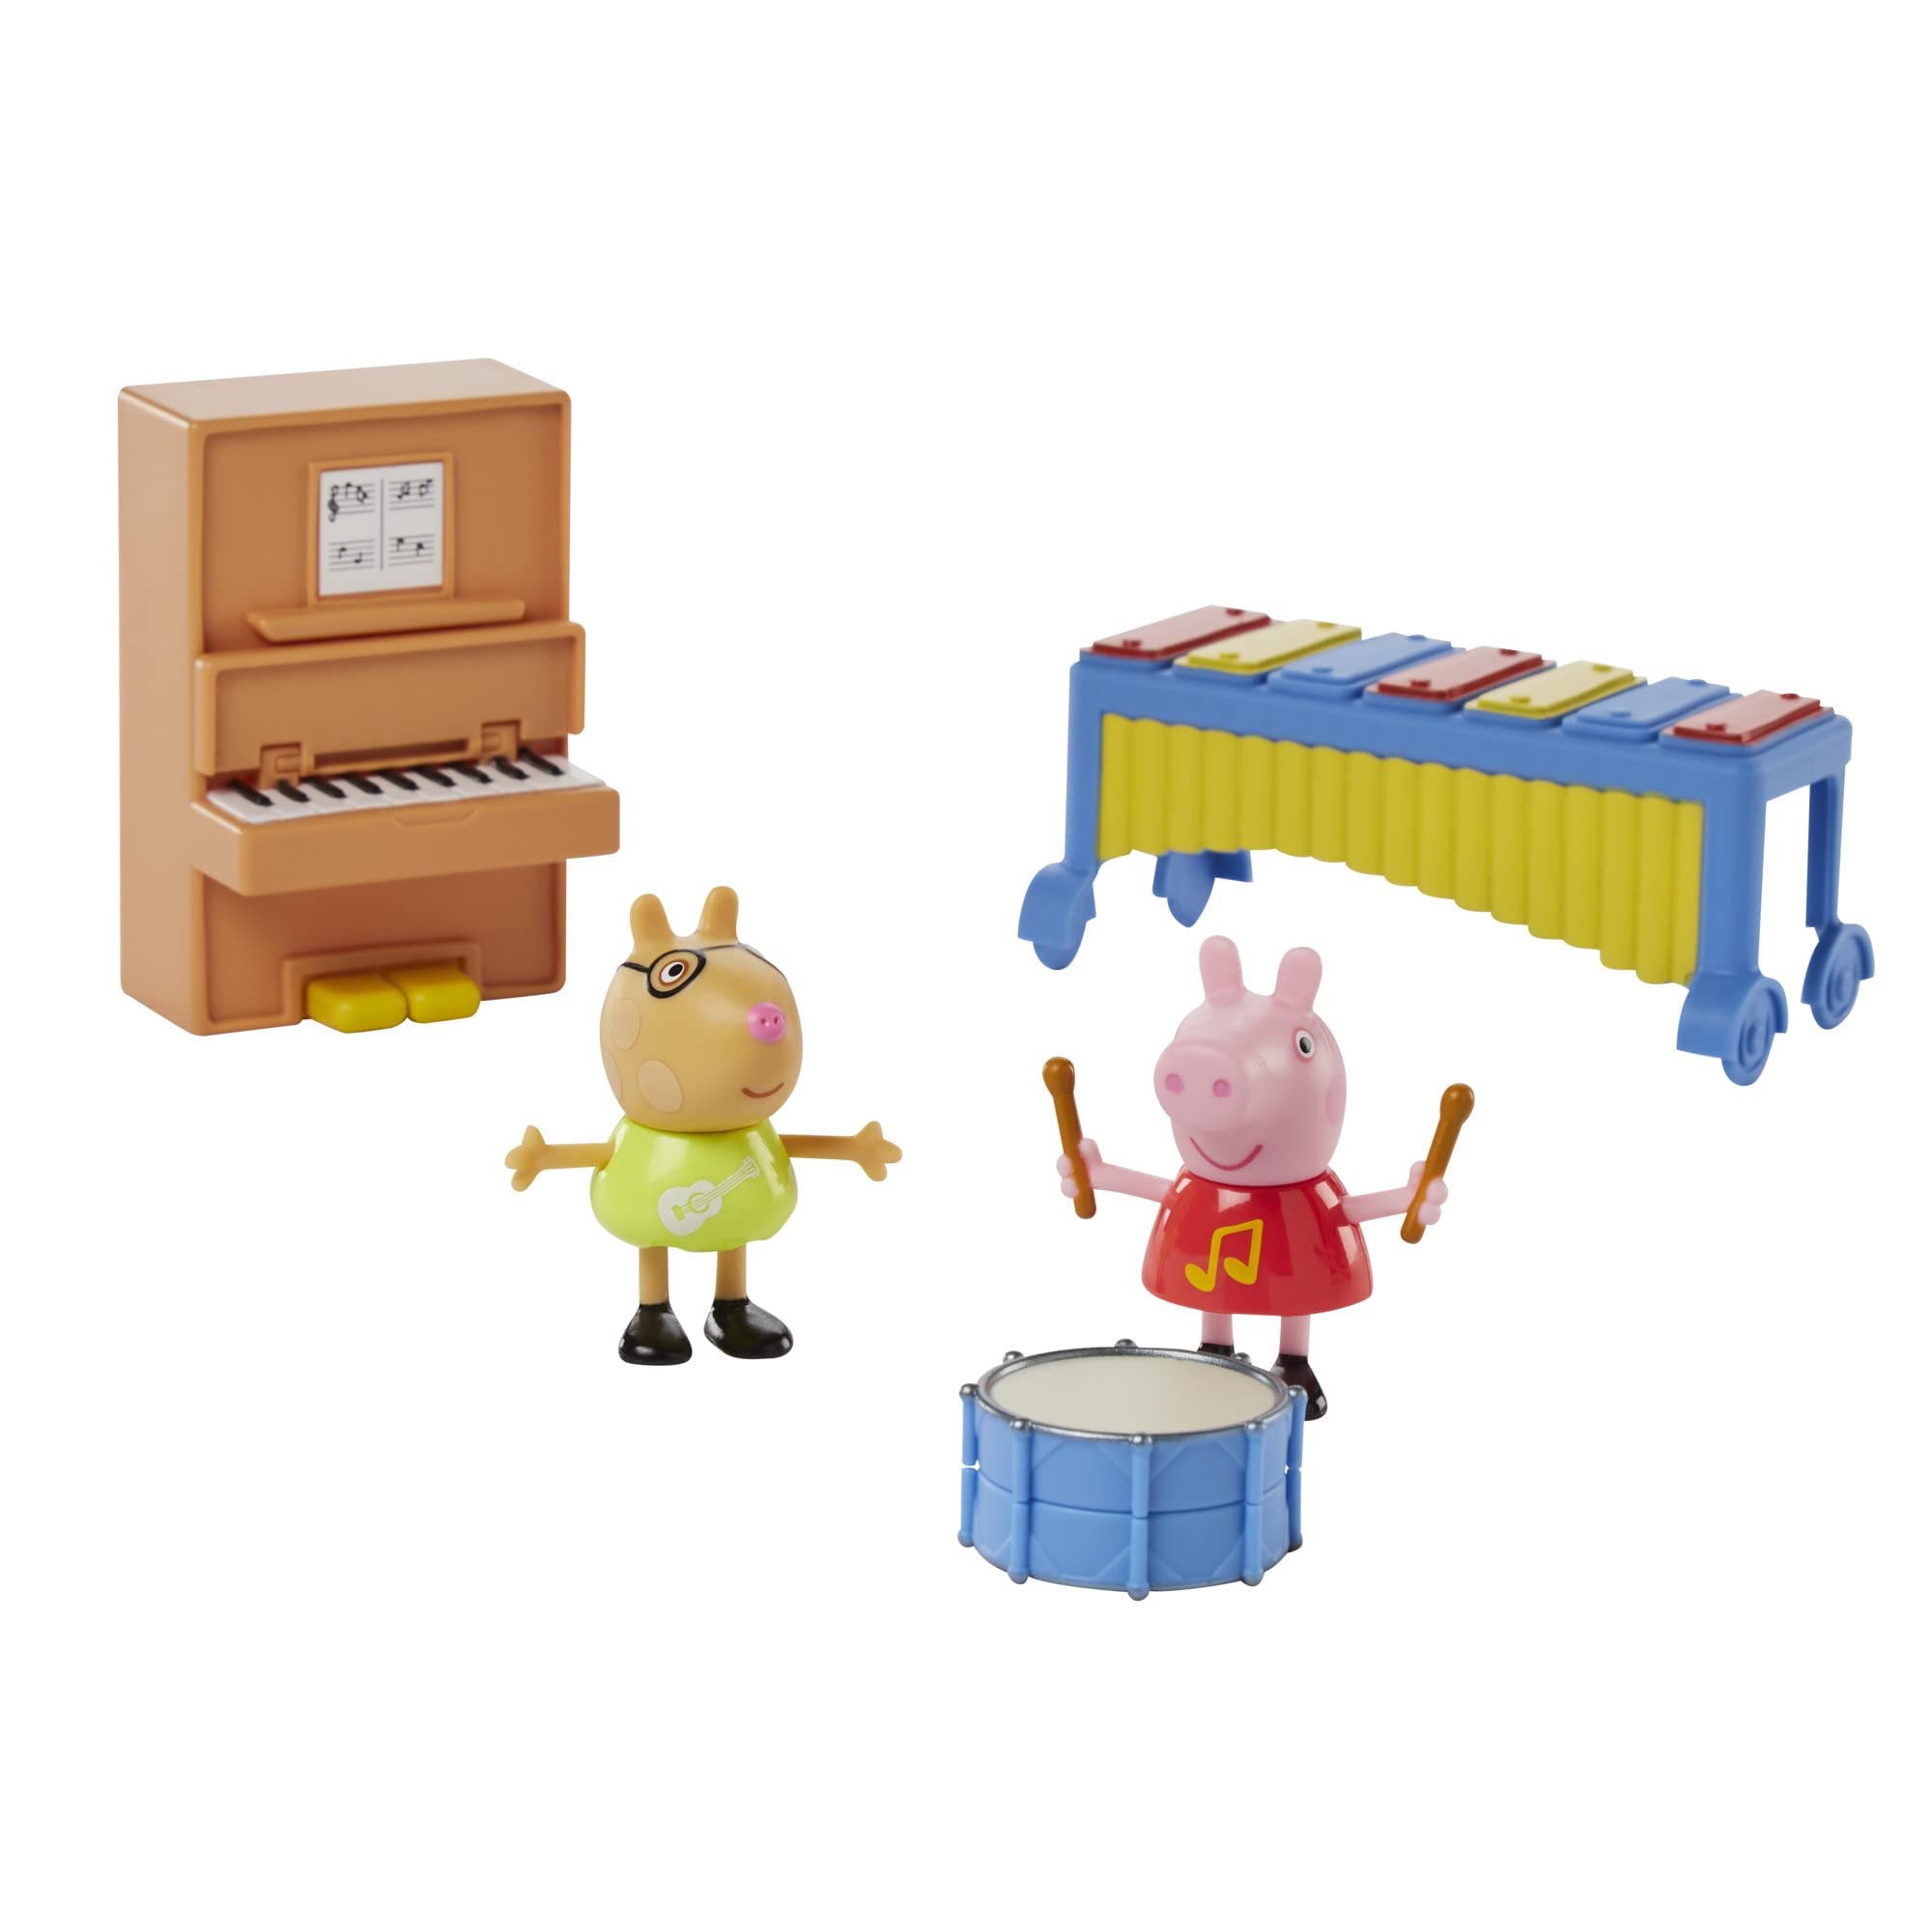 Peppa Pig Peppa's Adventures Peppa's Making Music Fun Preschool Toy, with 2 Figures and 3 Accessories, Ages 3 and Up